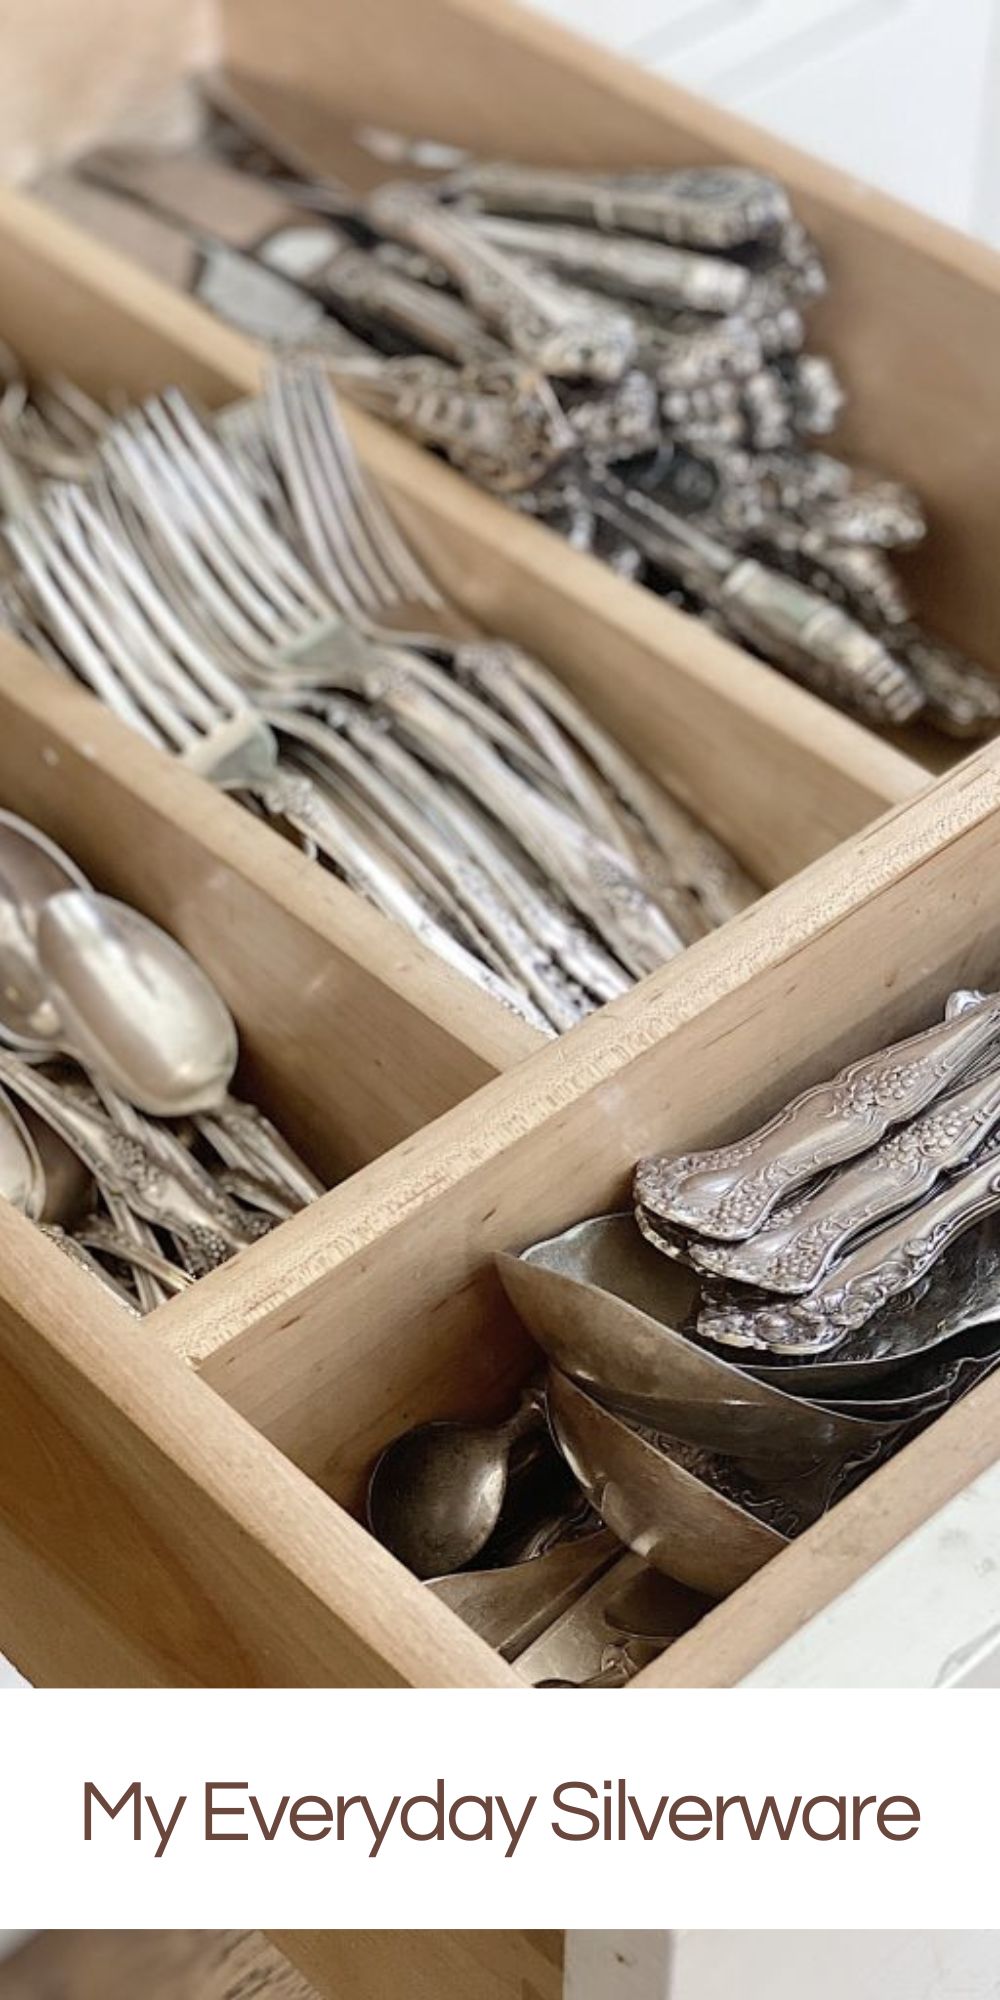 I shocked a lot of people when I mentioned I used my sterling silver flatware every day. But that wasn't the most shocking part.